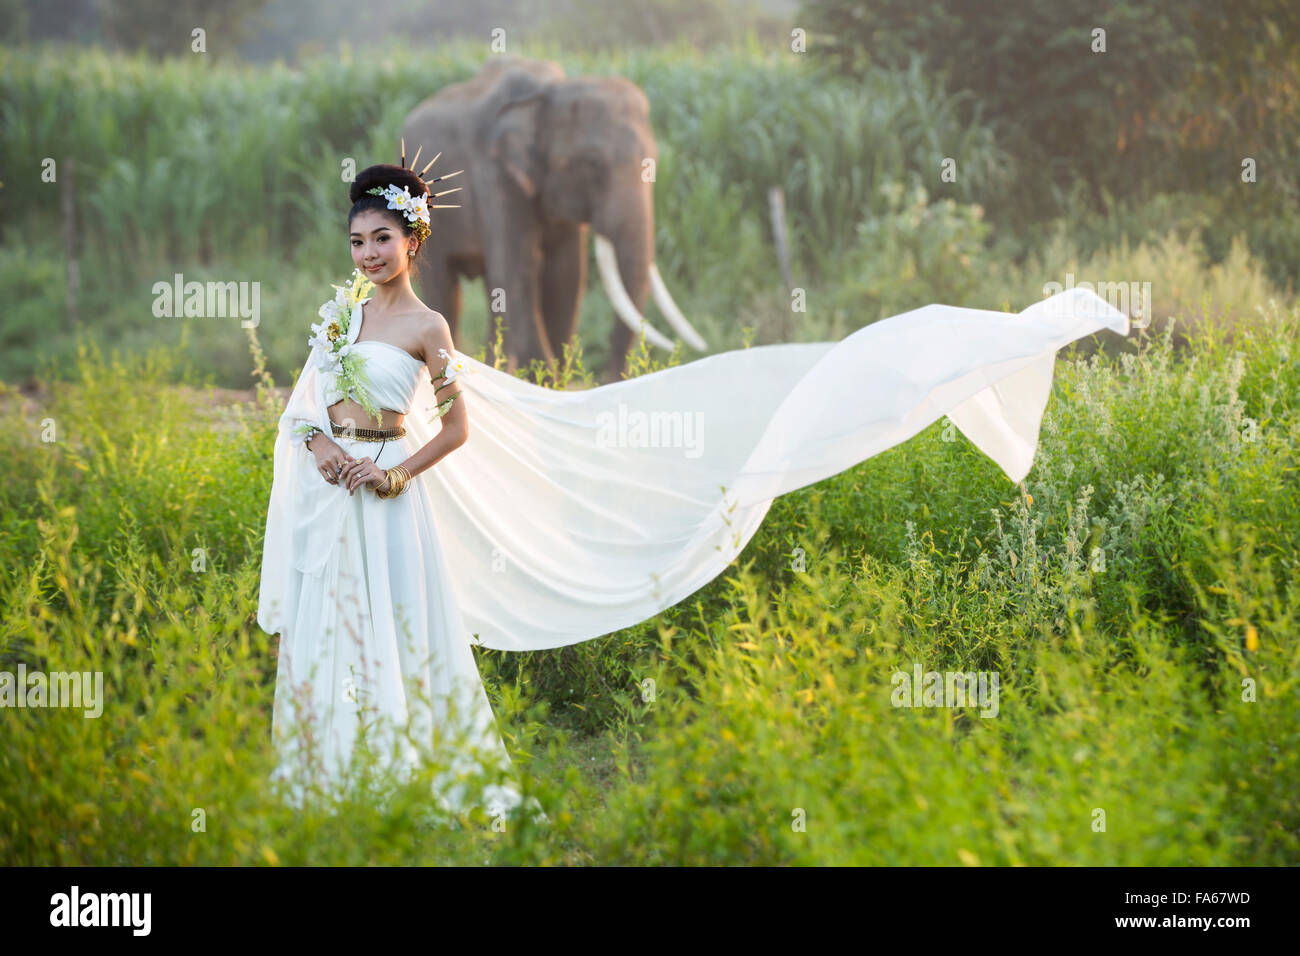 Woman in white dress standing in front of an elephant, Thailand Stock Photo